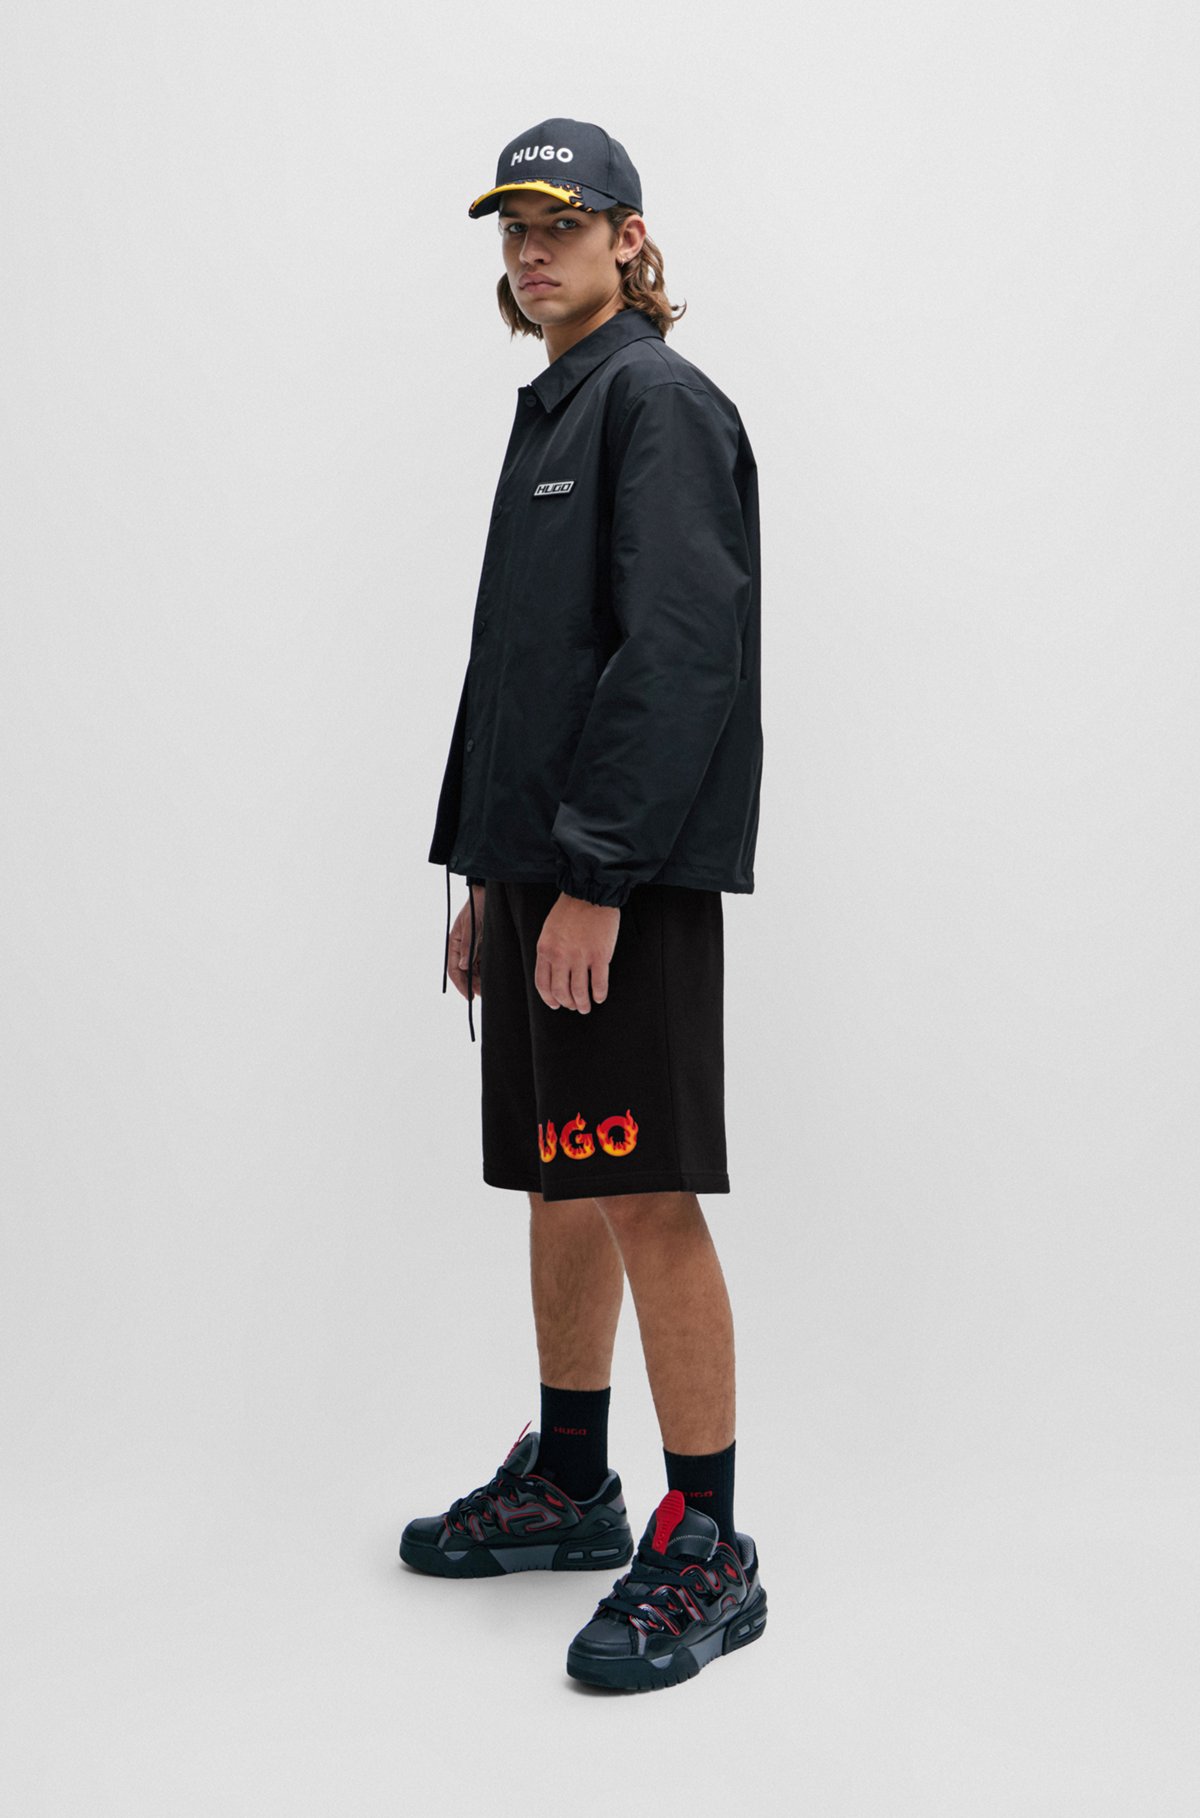 Cotton-terry shorts with puffed flame logo, Black